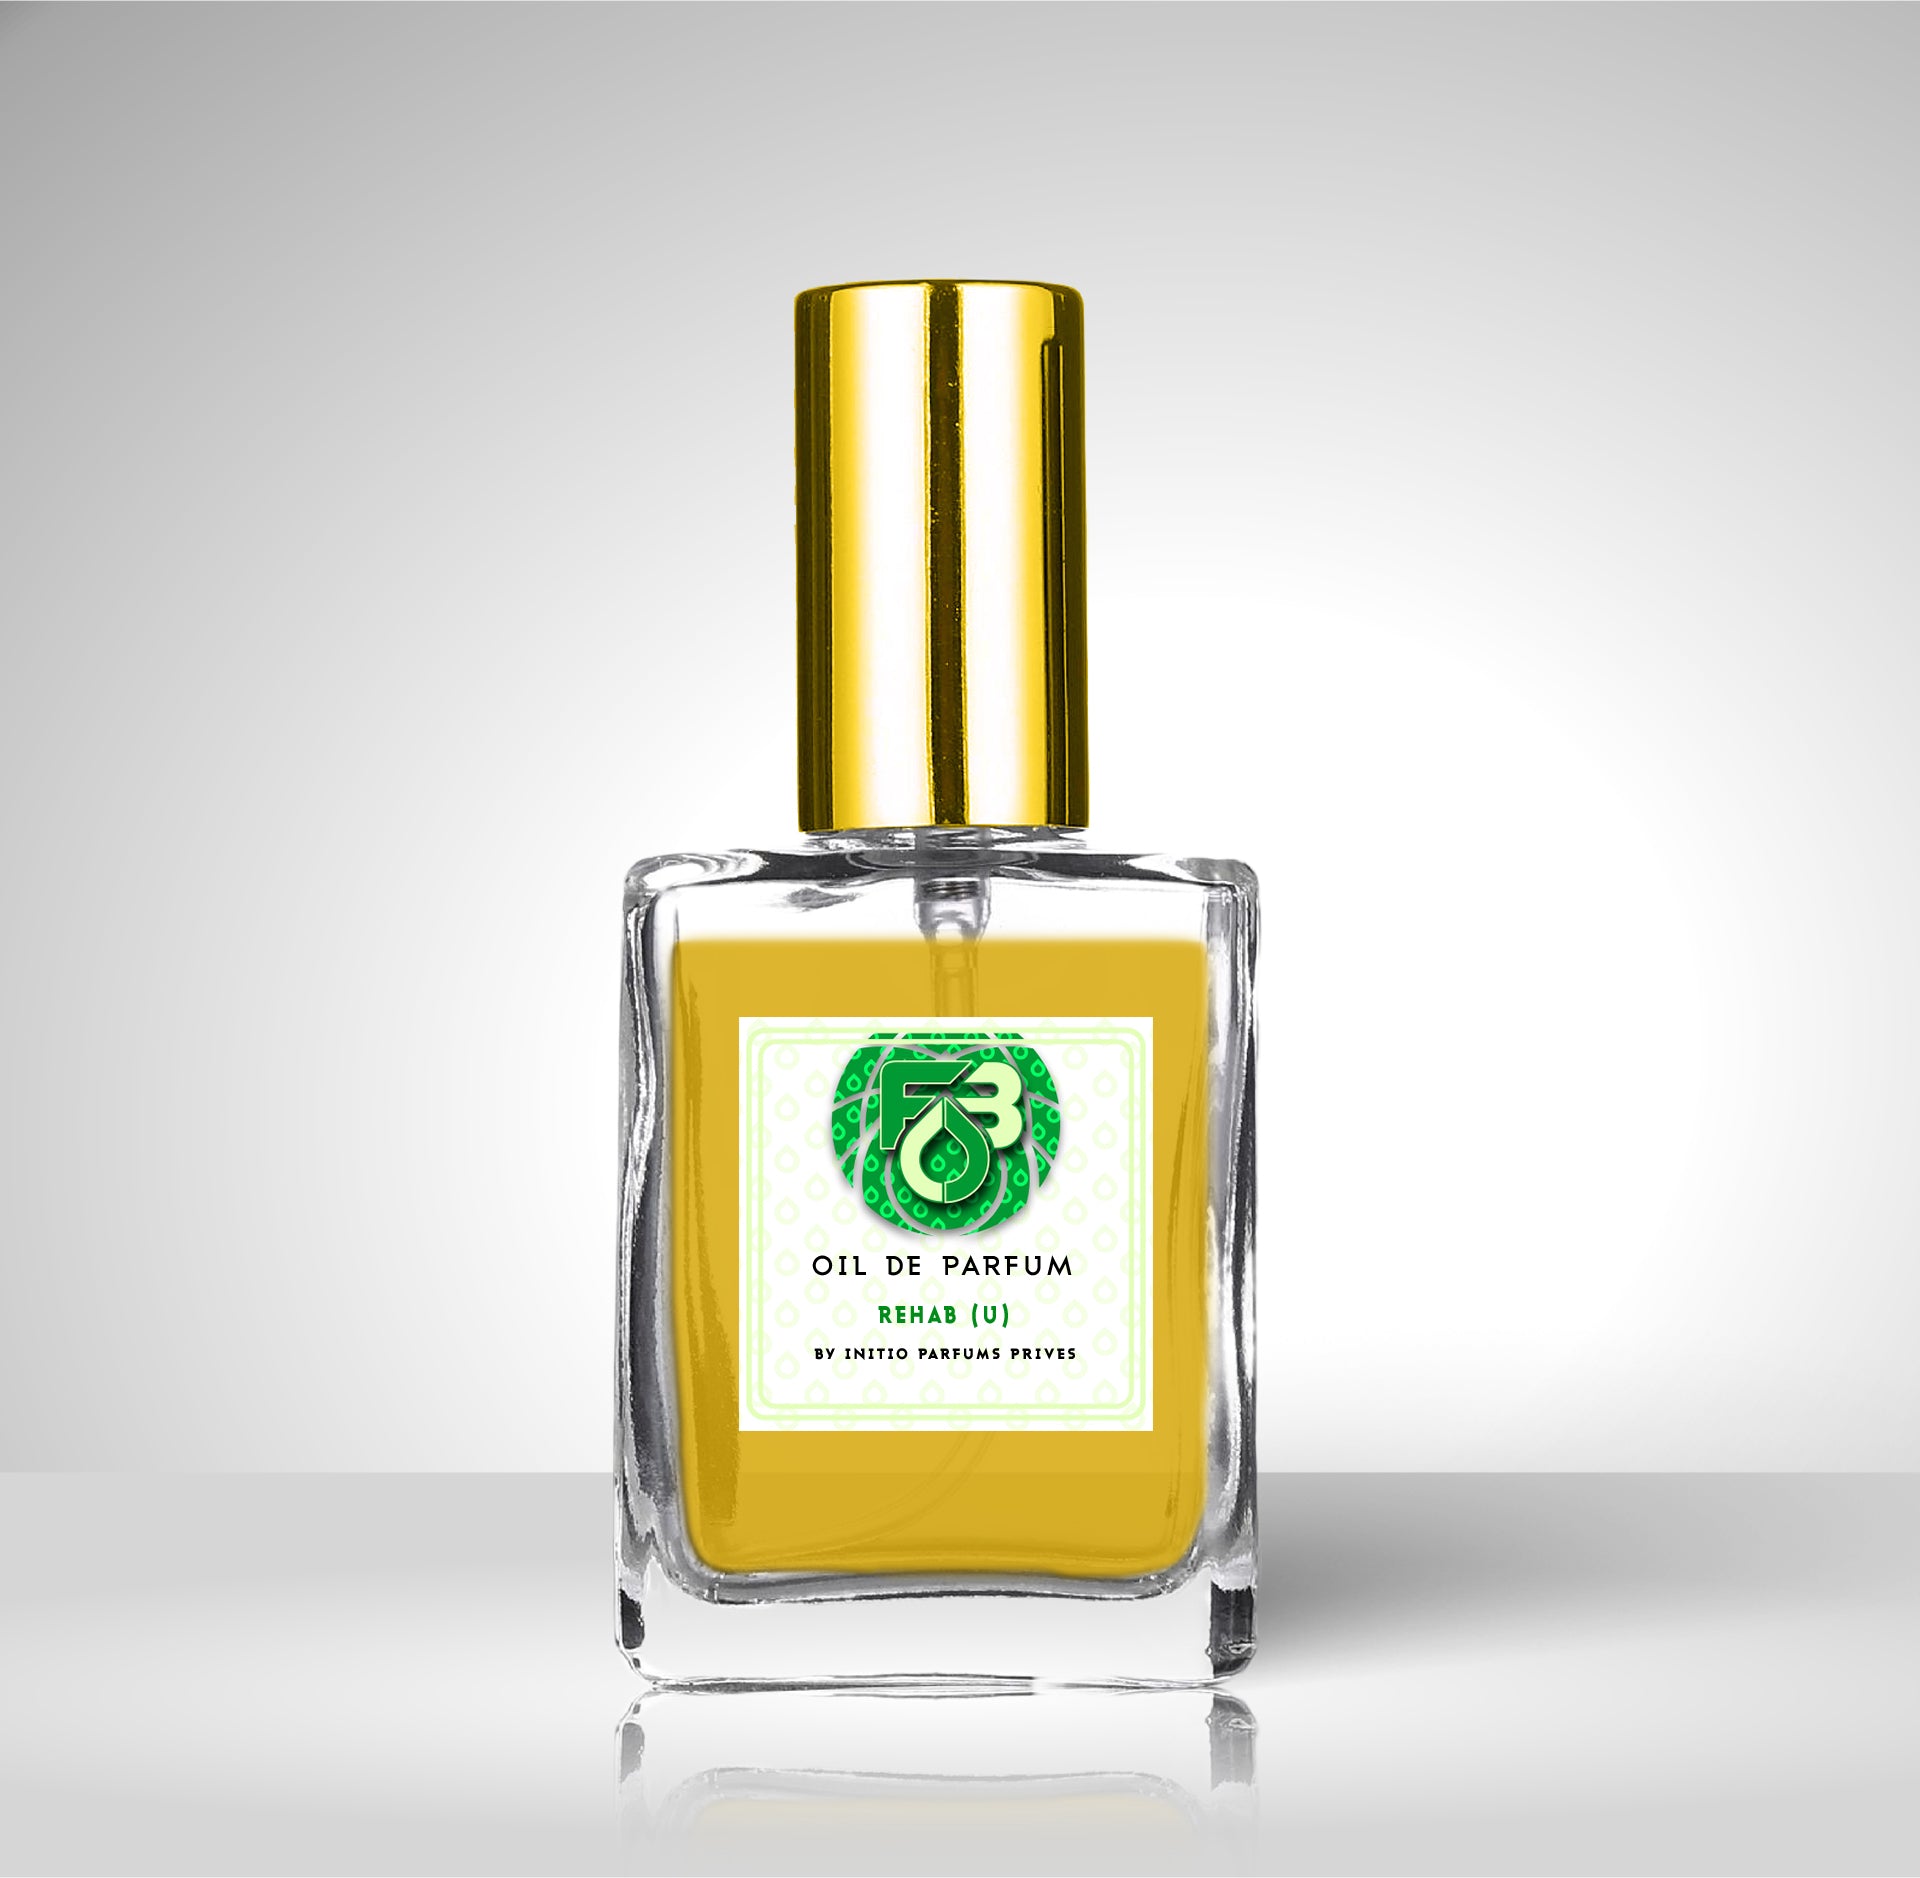 Discontinued Compare Aroma To Rehab® By Initio Parfums Prives